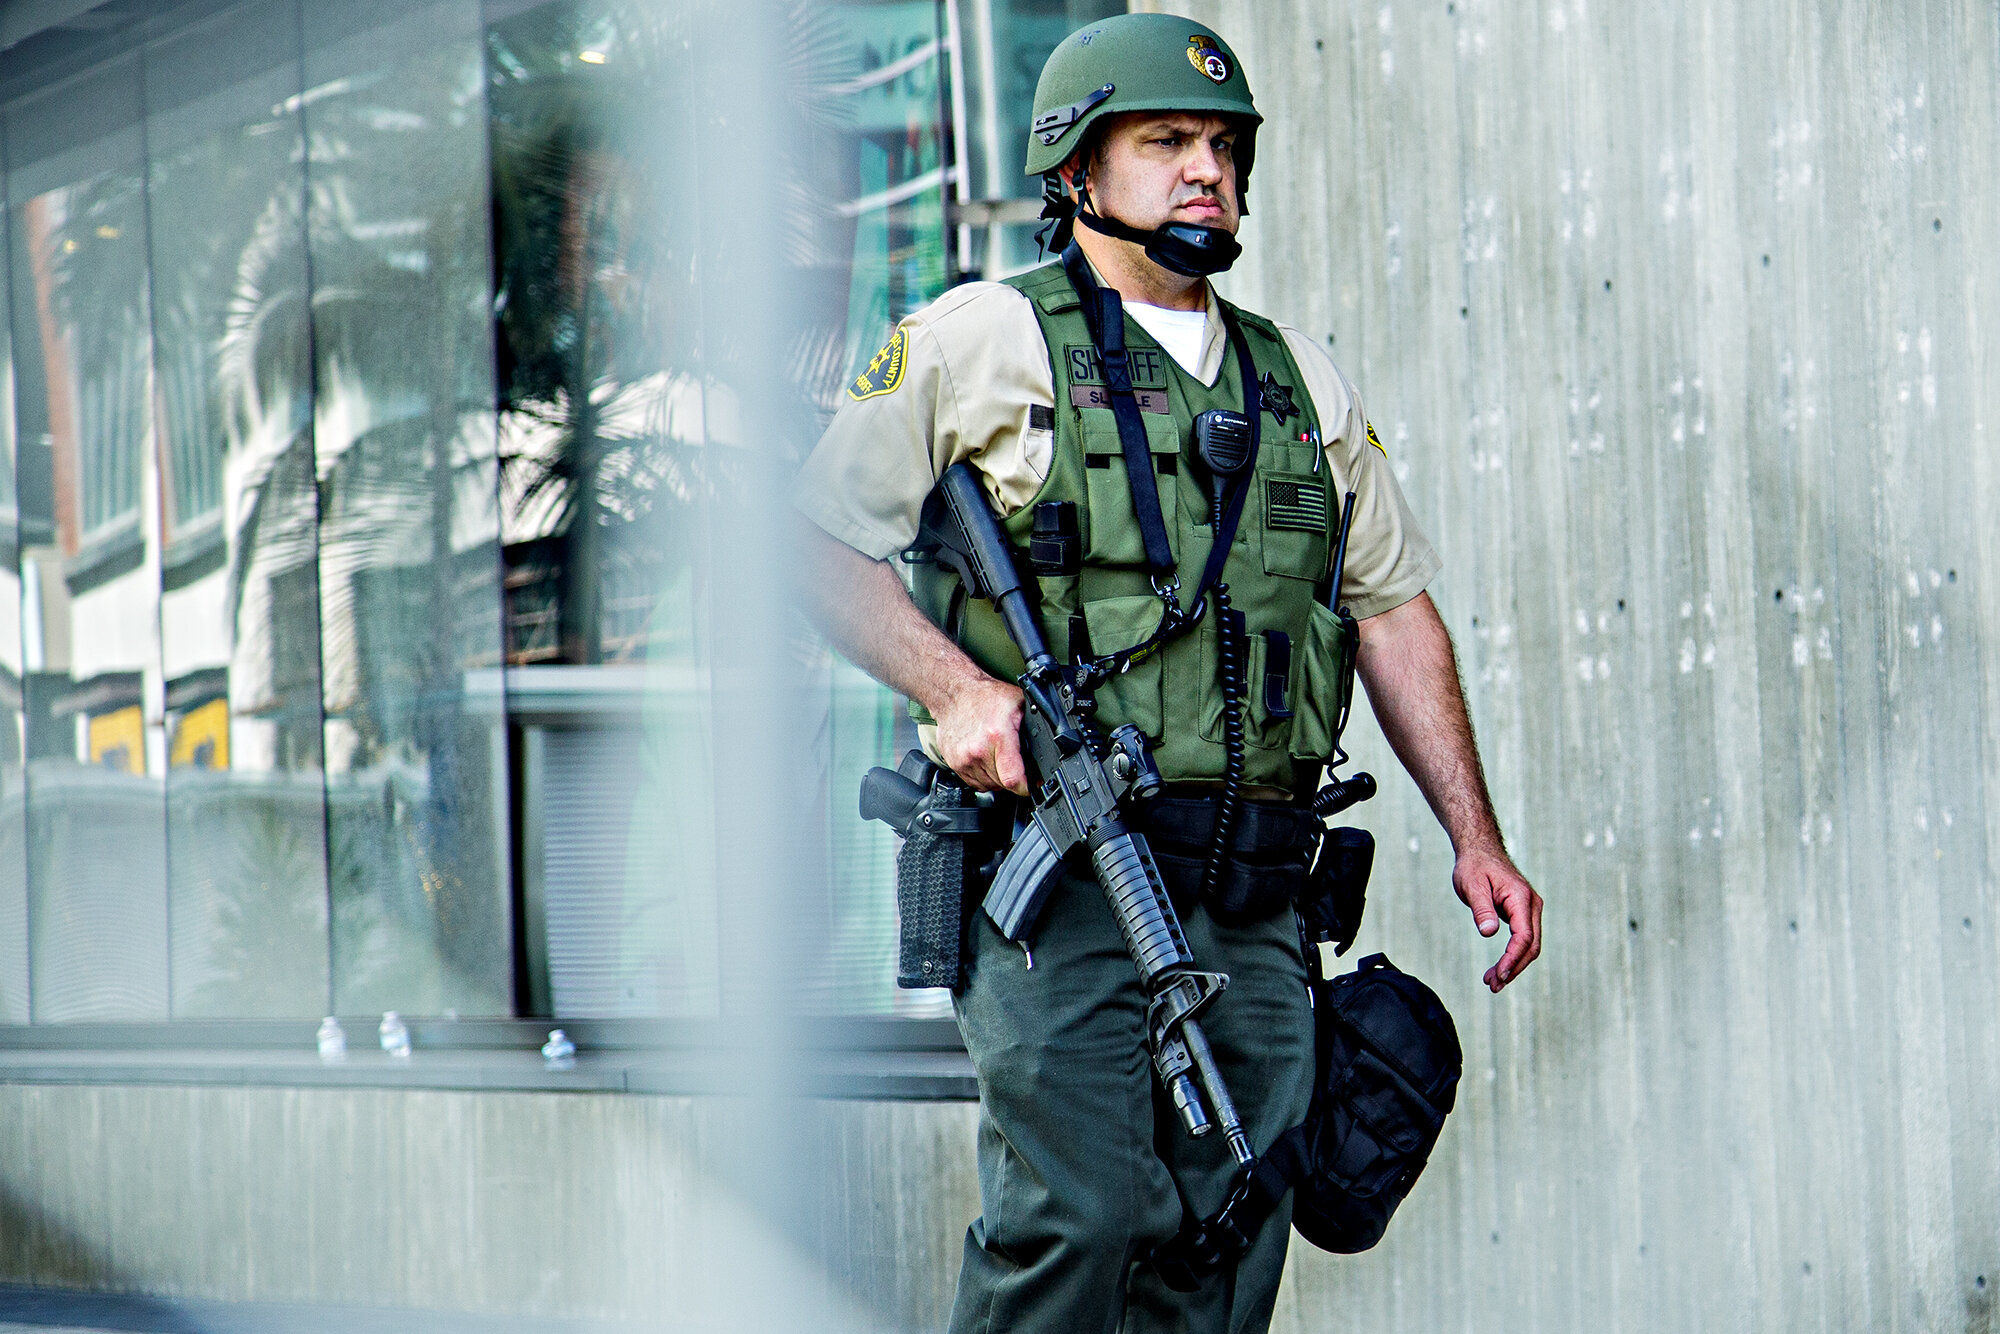  A Los Angeles County sheriff deputy patrols the Santa Monica Place mall, in Santa Monica, Calif., on Sunday, May 31, 2020. In expectation of civil unrest, the mall had been sealed off with chain link fencing, and many stores that faced out towards s